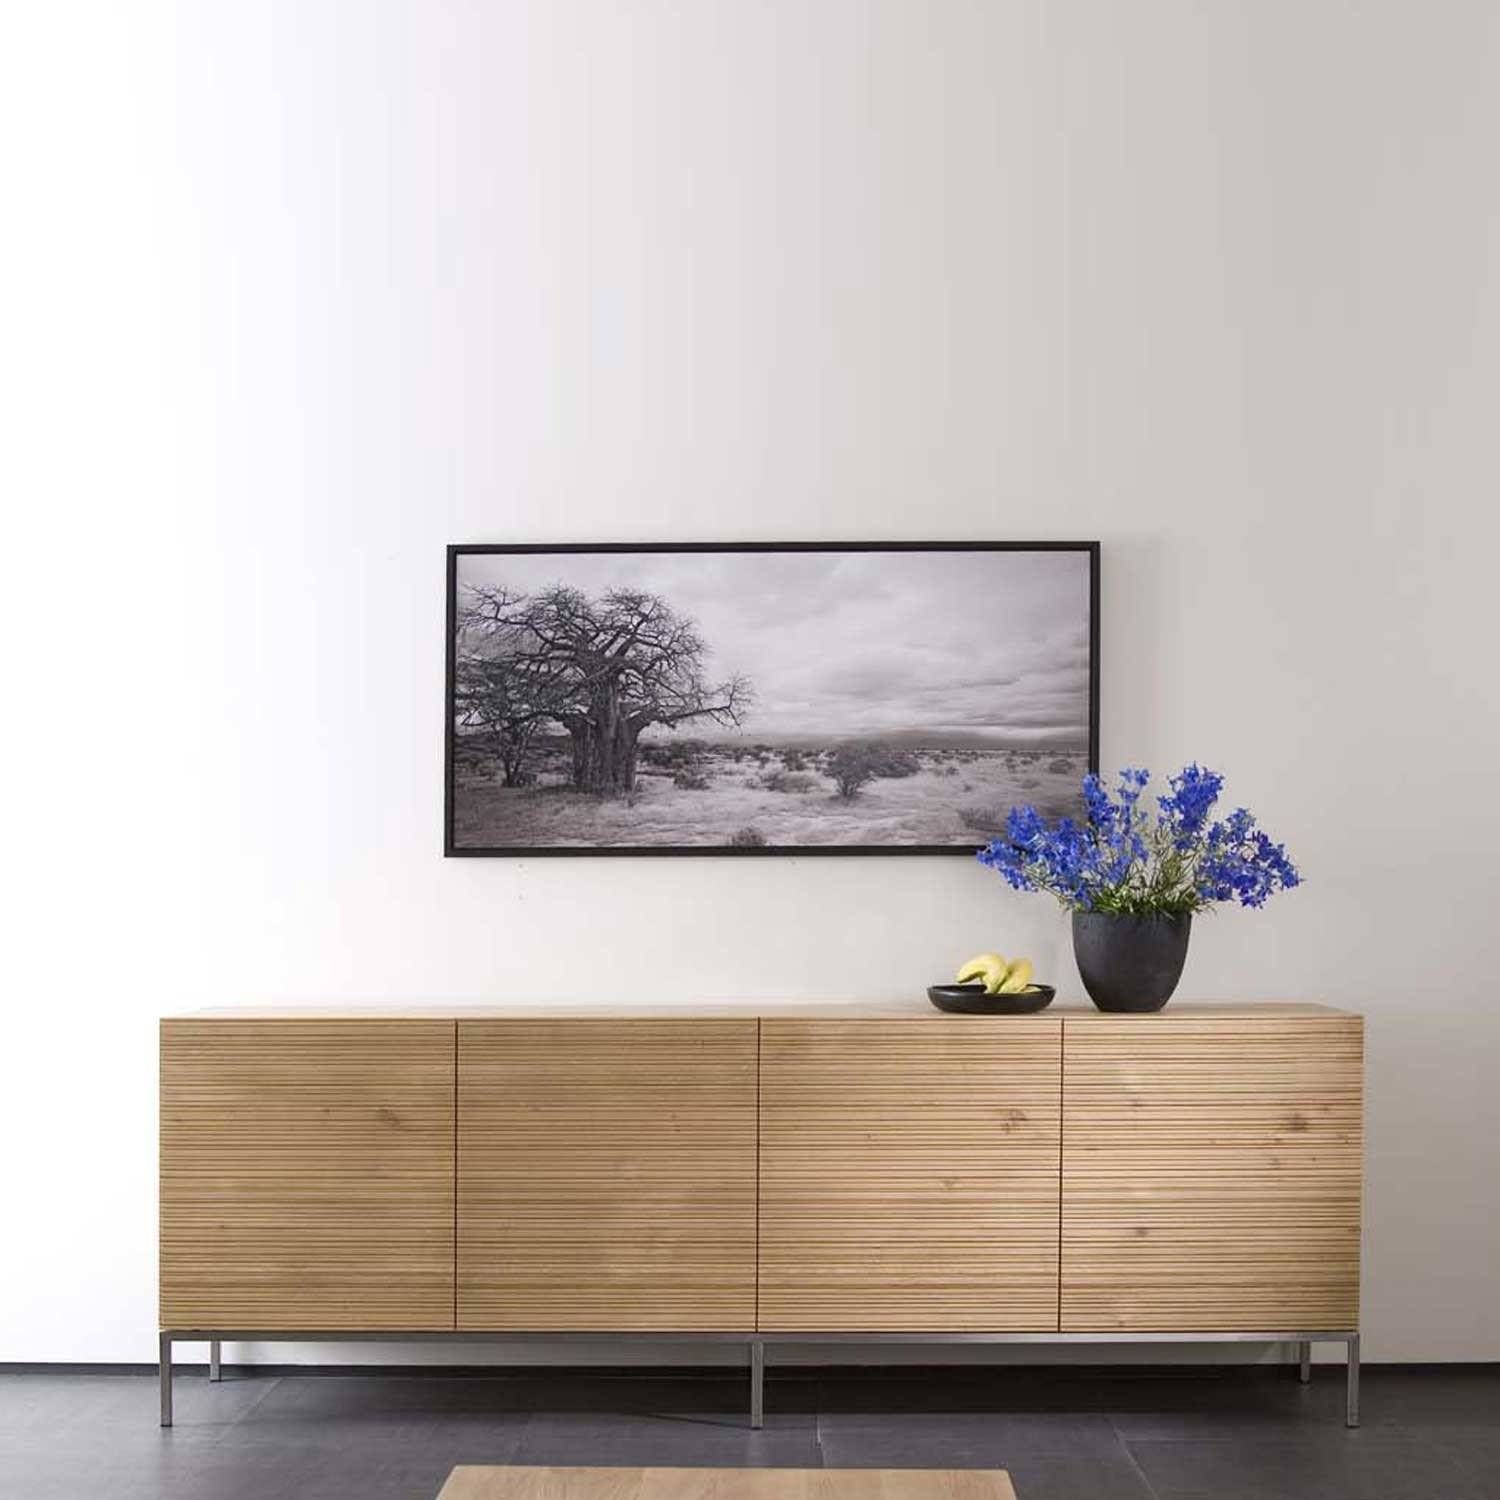 Ethnicraft Stonecut Oak Sideboards | Solid Wood Furniture Regarding Recent Low Wooden Sideboards (View 10 of 15)